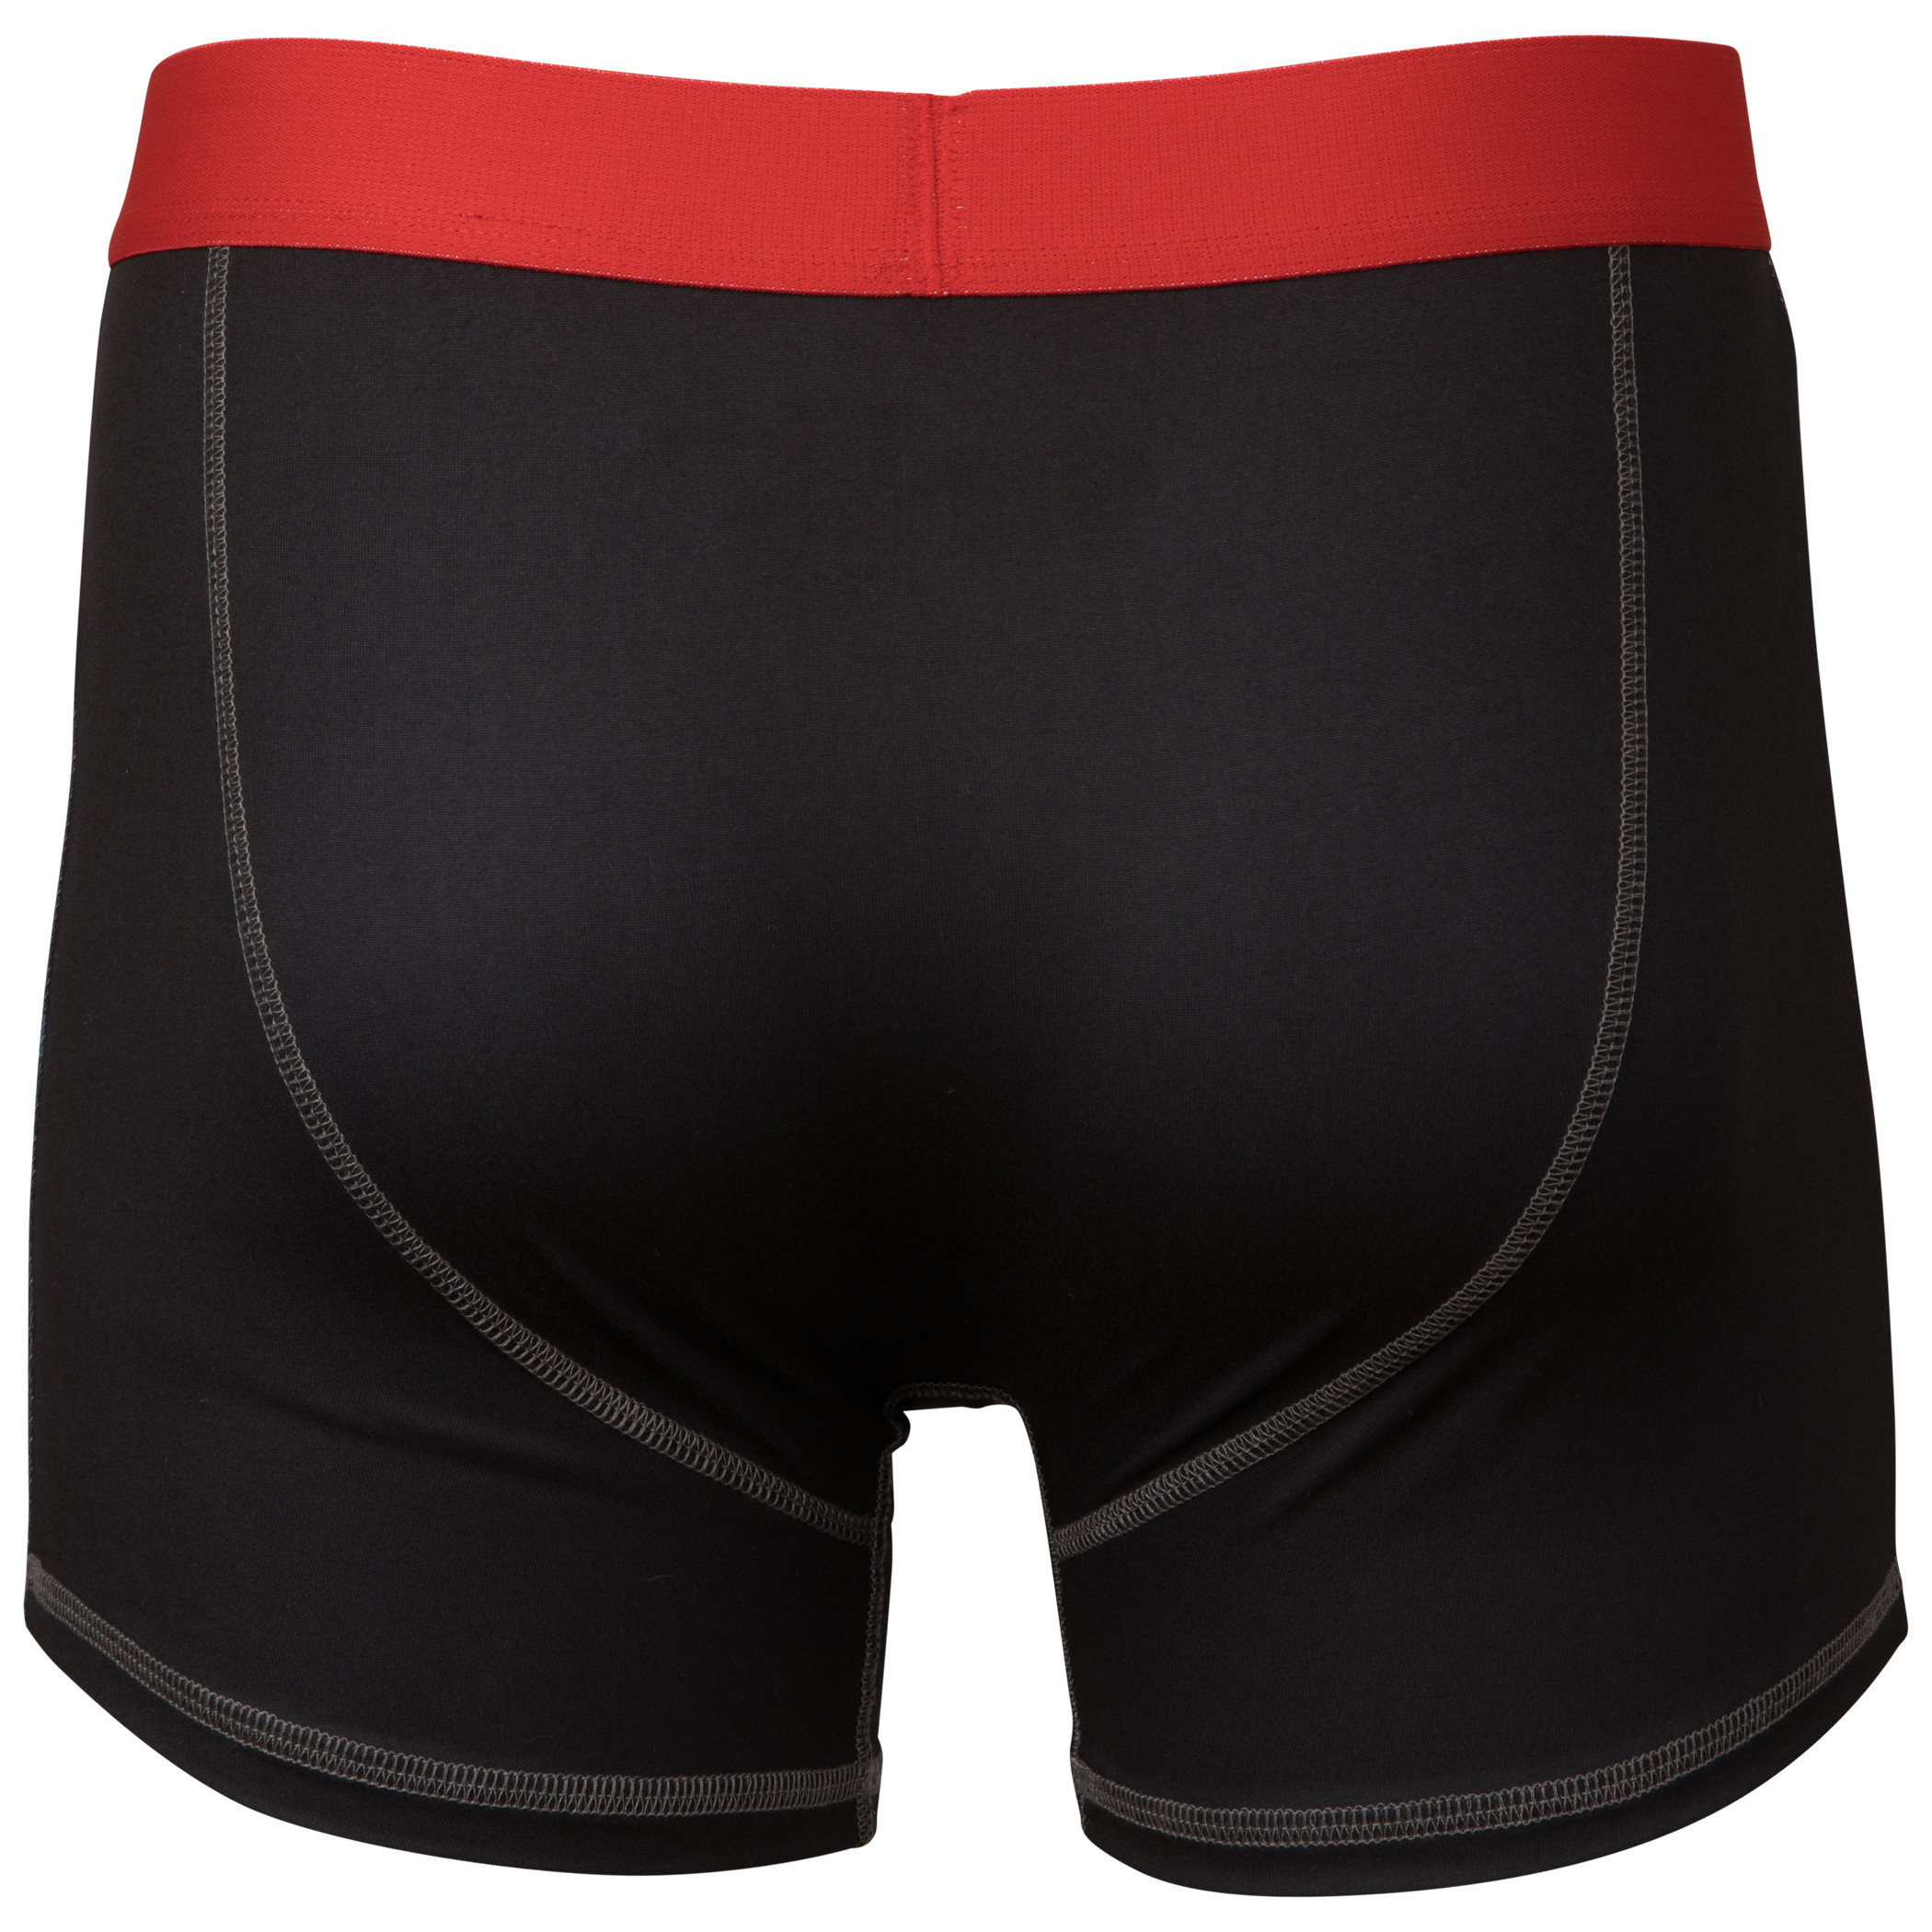 Spider-Man Miles Morales Character Armor Style Boxer Briefs Black